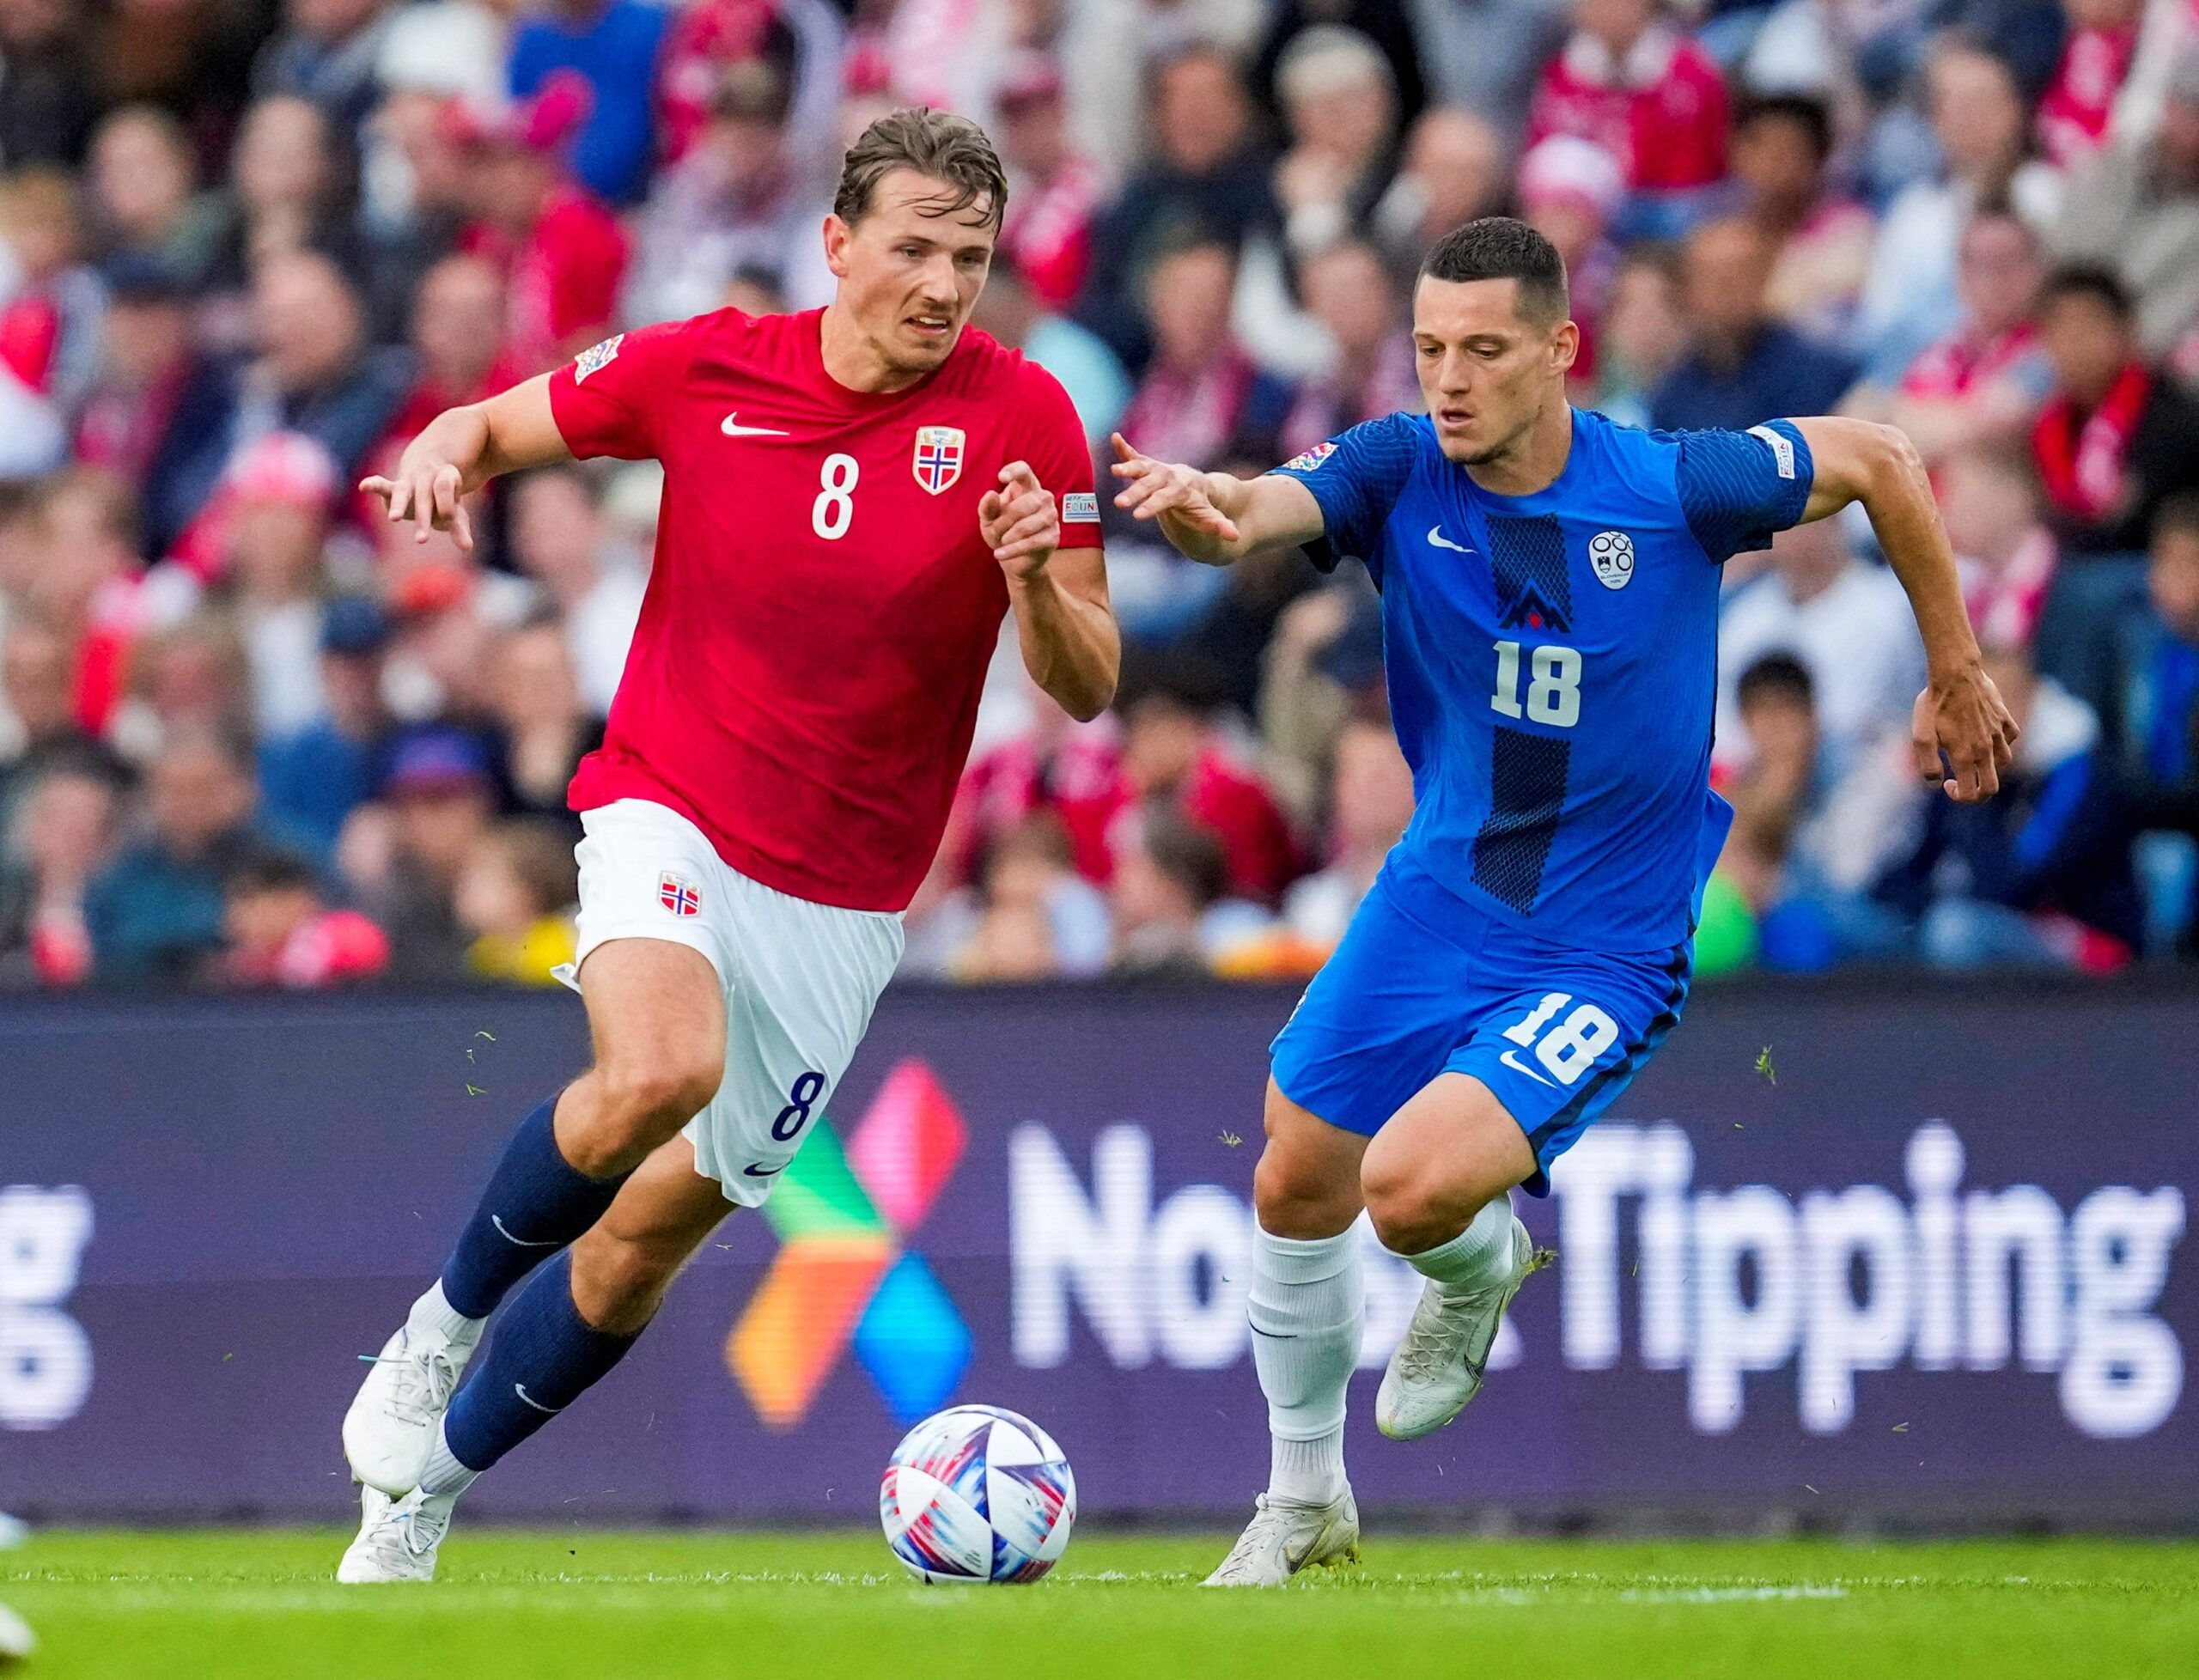 Soccer Football - UEFA Nations League - Group H - Norway v Slovenia - Ullevaal Stadion, Oslo, Norway - June 9, 2022 Norway's Sander Berge in action Slovenia's Zan Celar  Javad Parsa/NTB via REUTERS    ATTENTION EDITORS - THIS IMAGE WAS PROVIDED BY A THIRD PARTY. NORWAY OUT. NO COMMERCIAL OR EDITORIAL SALES IN NORWAY.